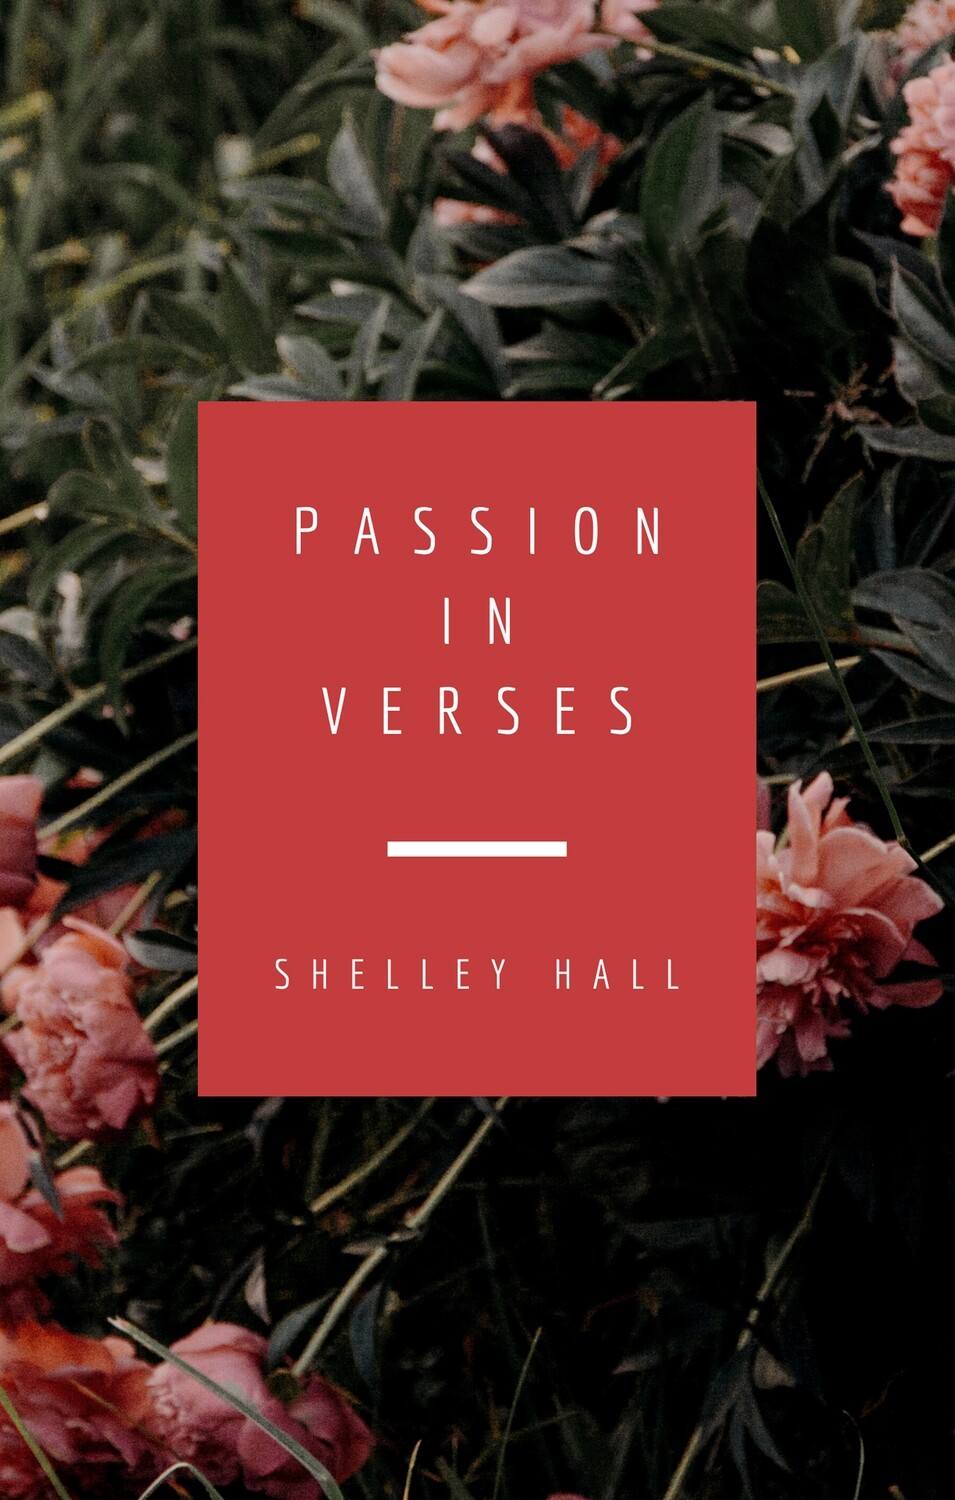 Passion in Verses by Shelley Hall